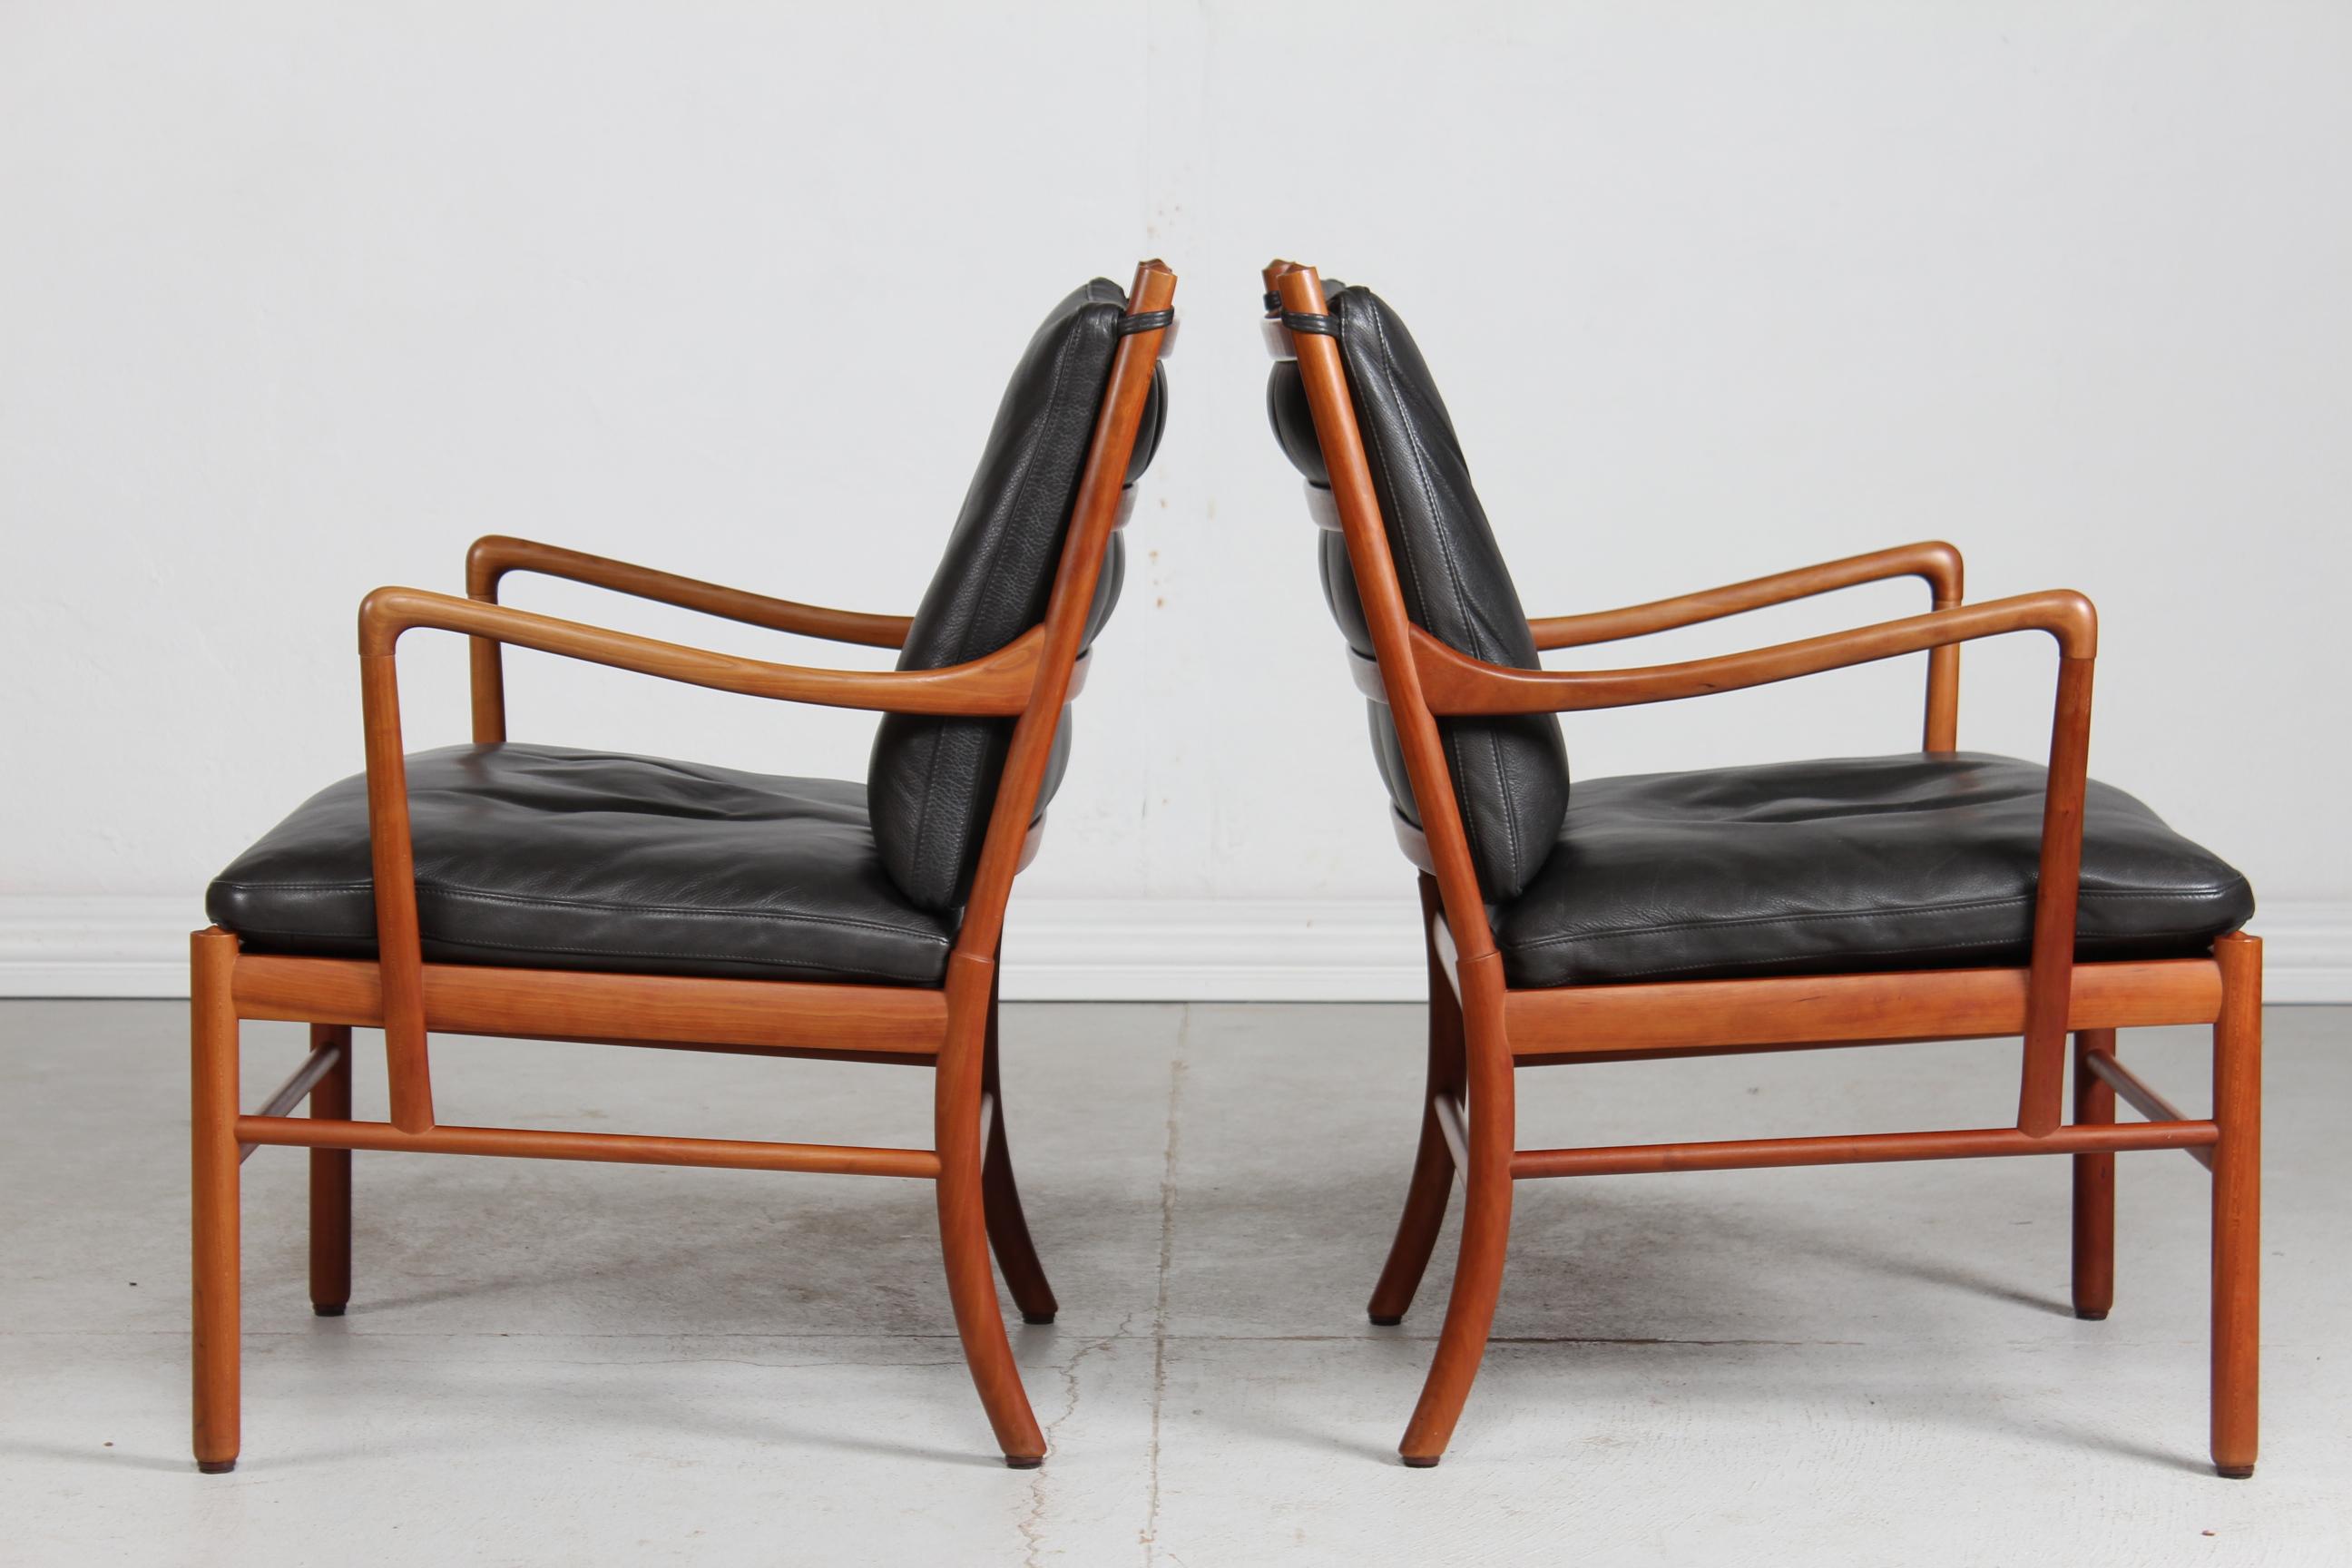 A pair of Colonial chairs model no. PJ 149 designed by Ole Wanscher (1903-1985) in 1949
These chairs are made of cherry wood with original cushions with black aniline leather. 
Manufactured by PJ Møbler, Denmark in the 1990´s

Very nice vintage